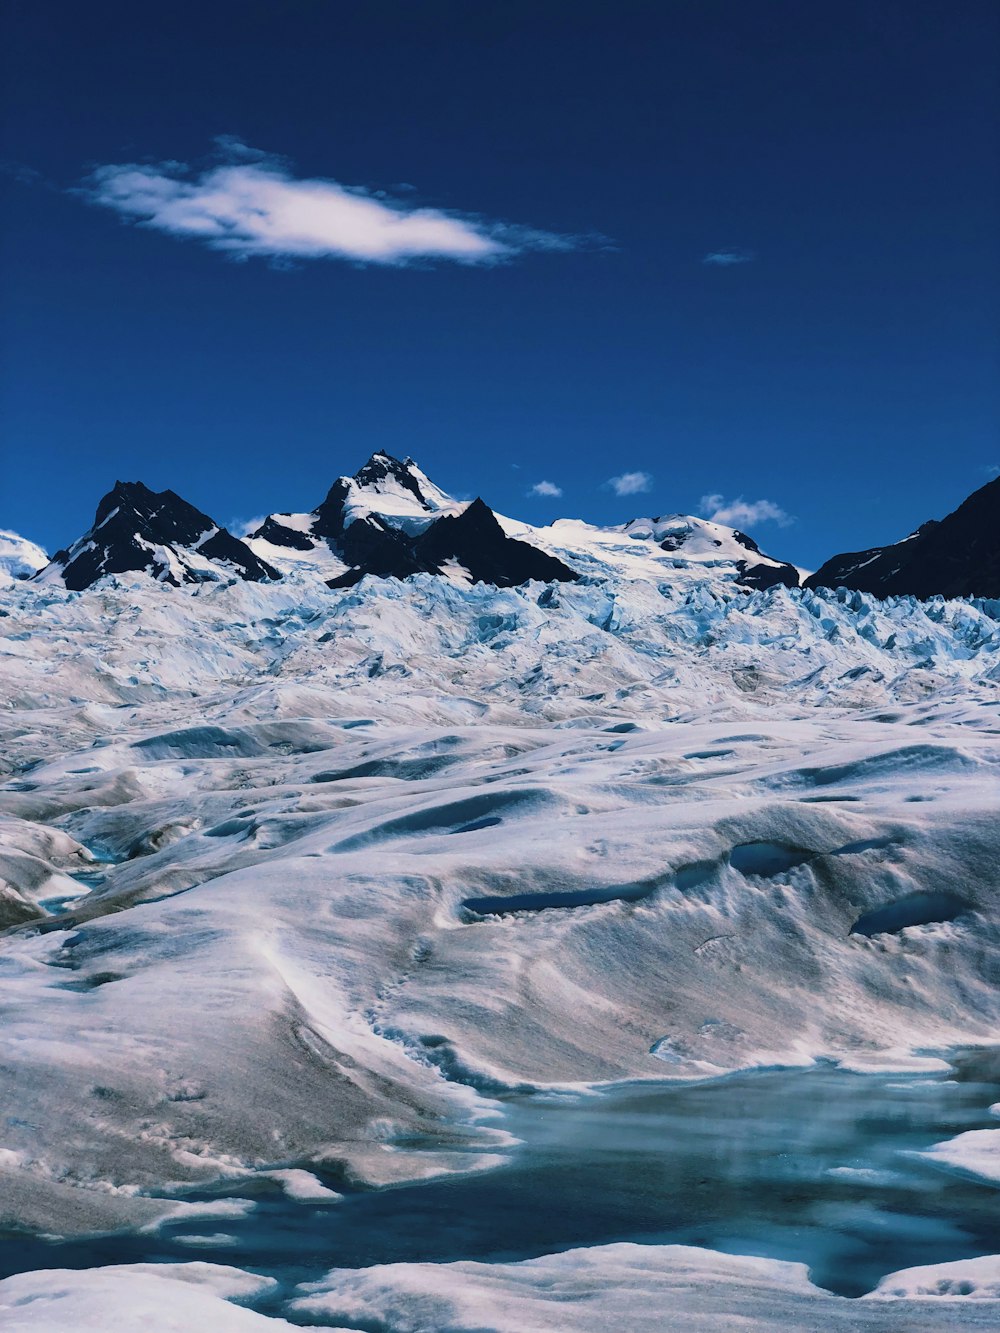 a view of a glacier with mountains in the background